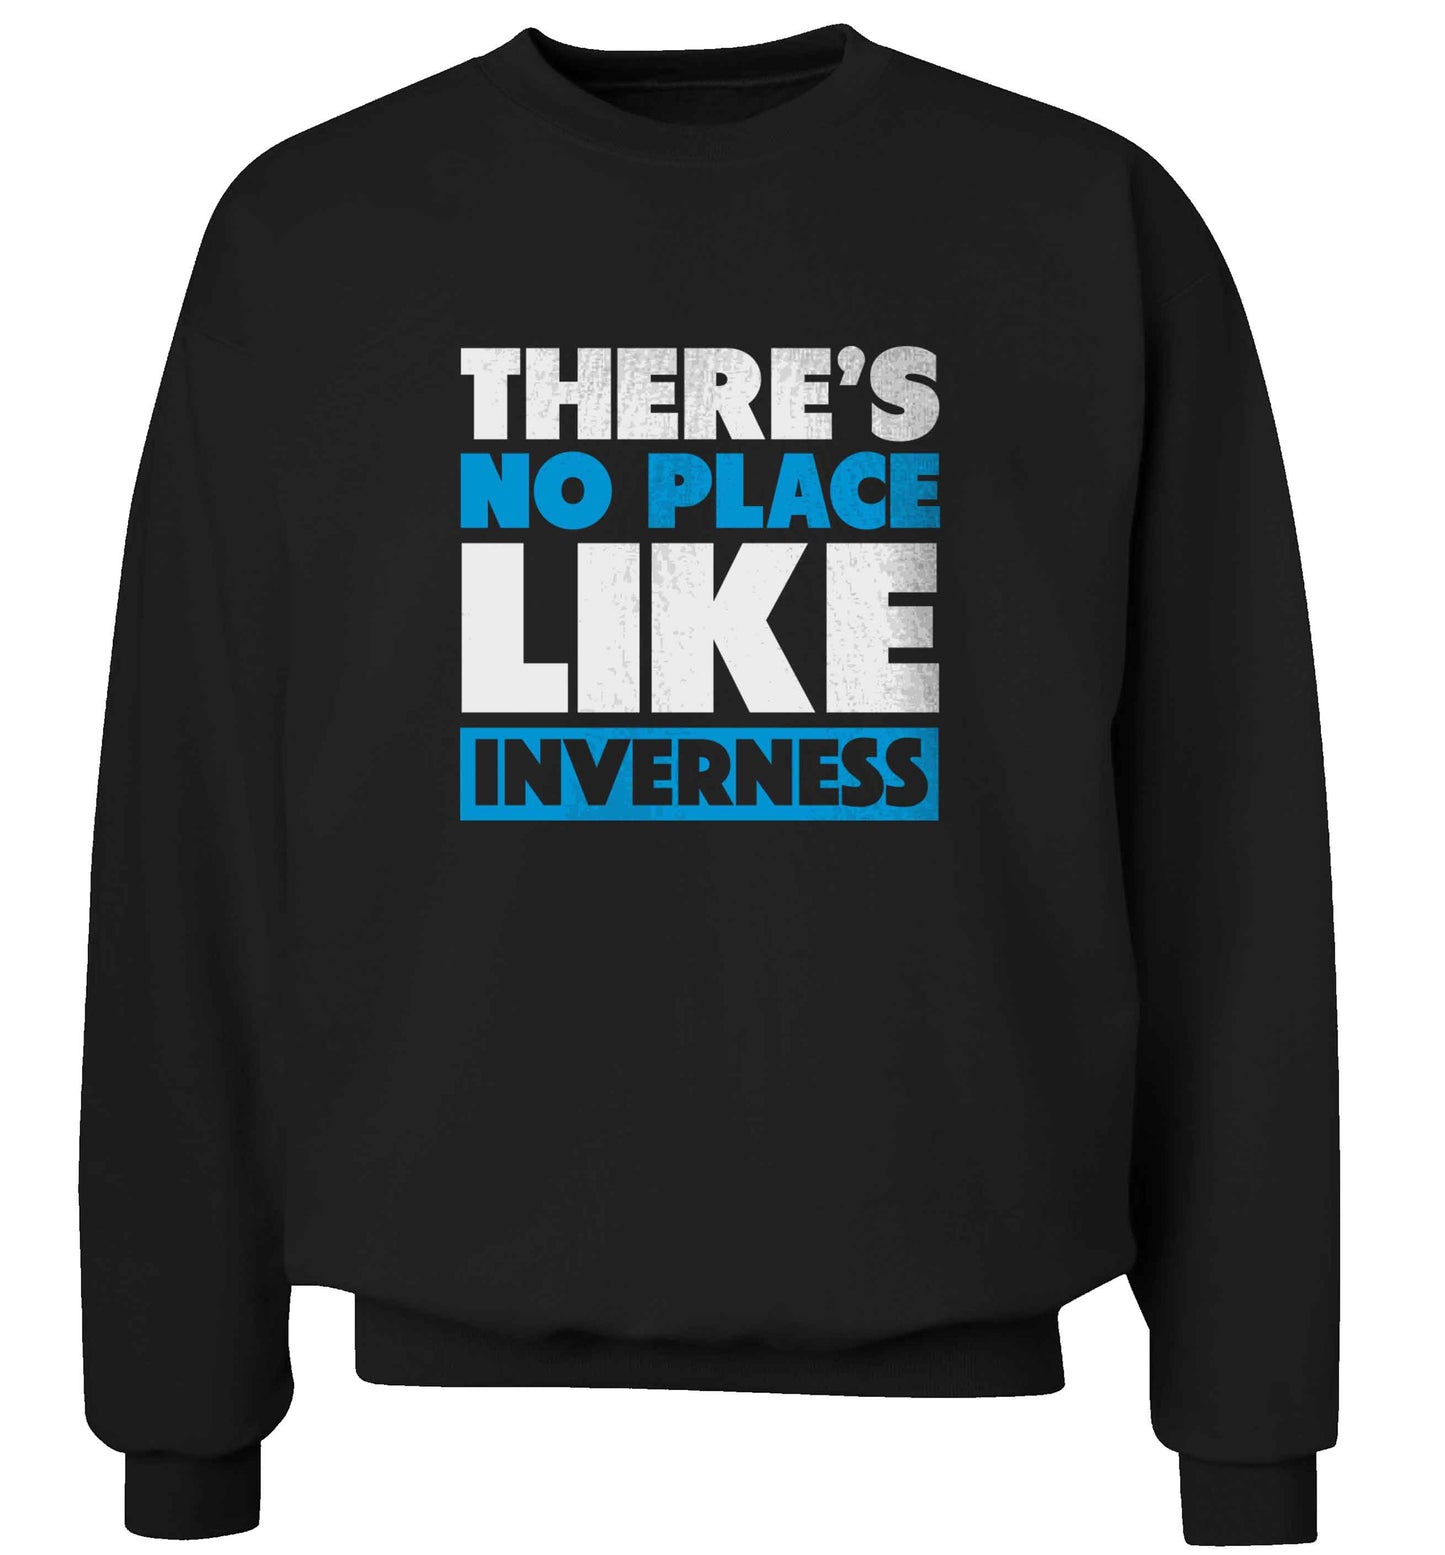 There's no place like Inverness adult's unisex black sweater 2XL